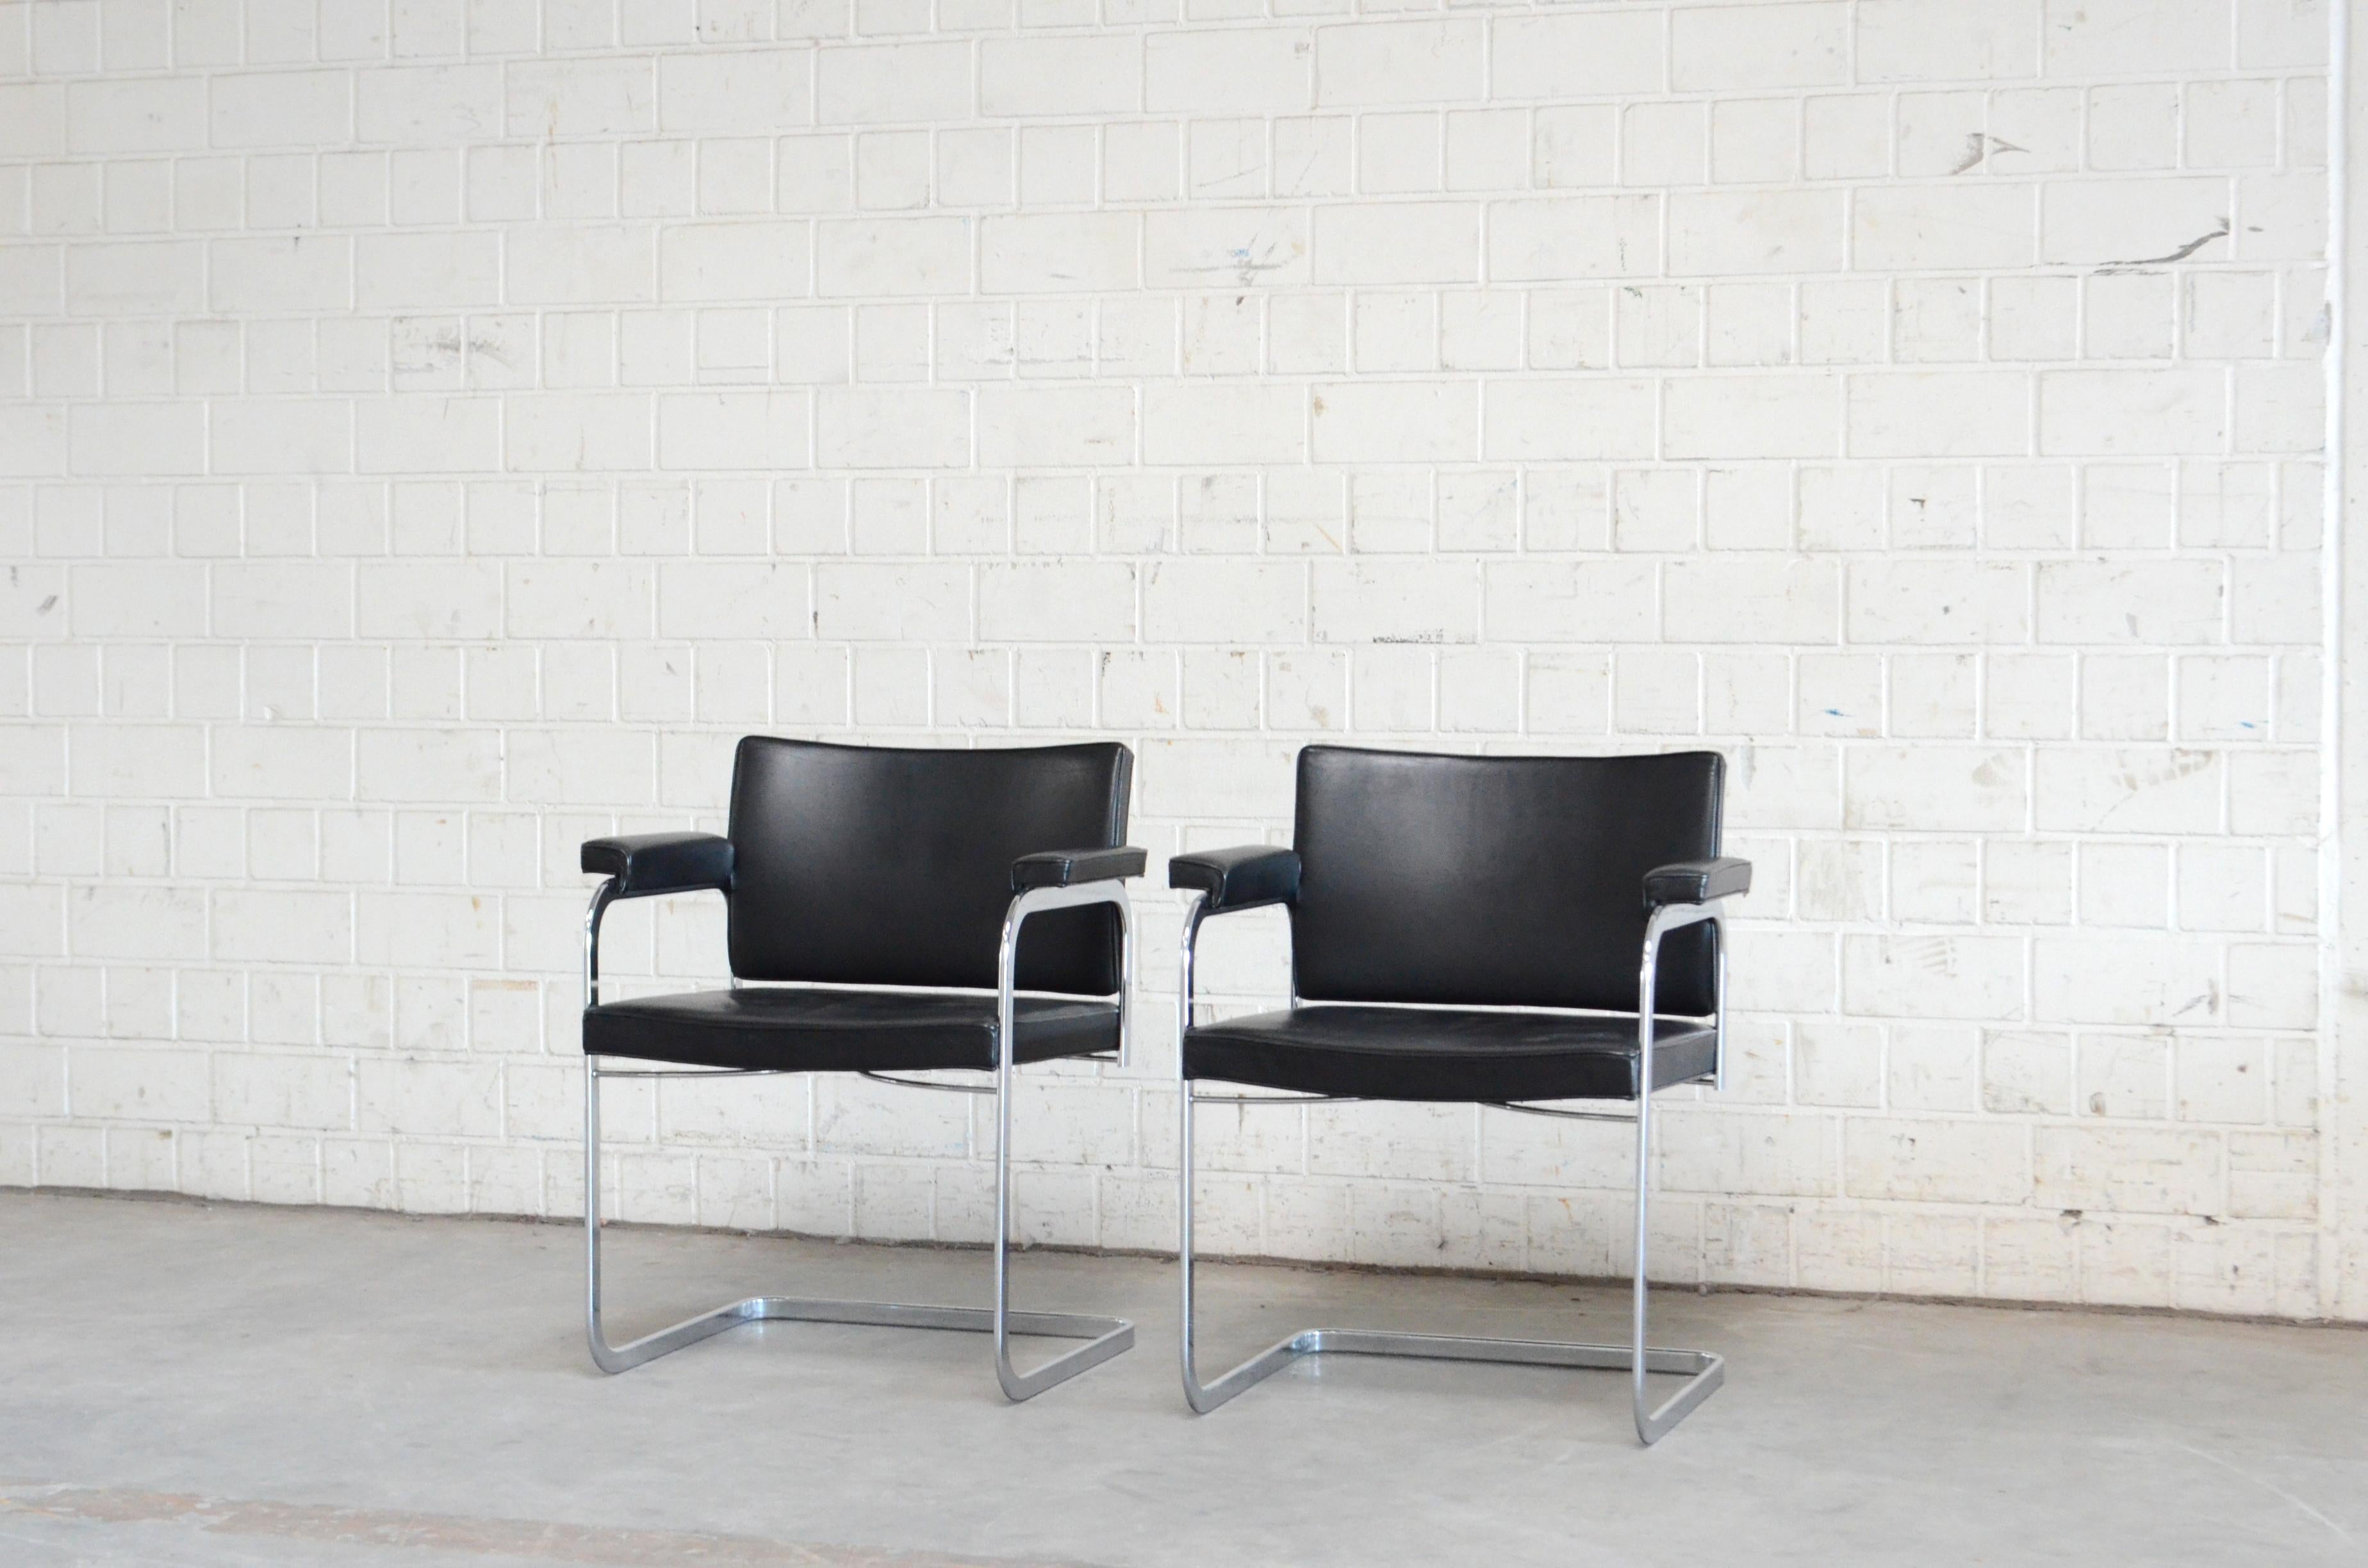 Robert Haussmann RH 305 armchair design of 1957 and manufactured by De Sede.
Black semi aniline leather and a chrome steel frame.
This is a Classic Swiss design chair.
Great condition.
Price for 1 chair
We have 2 chairs in store.